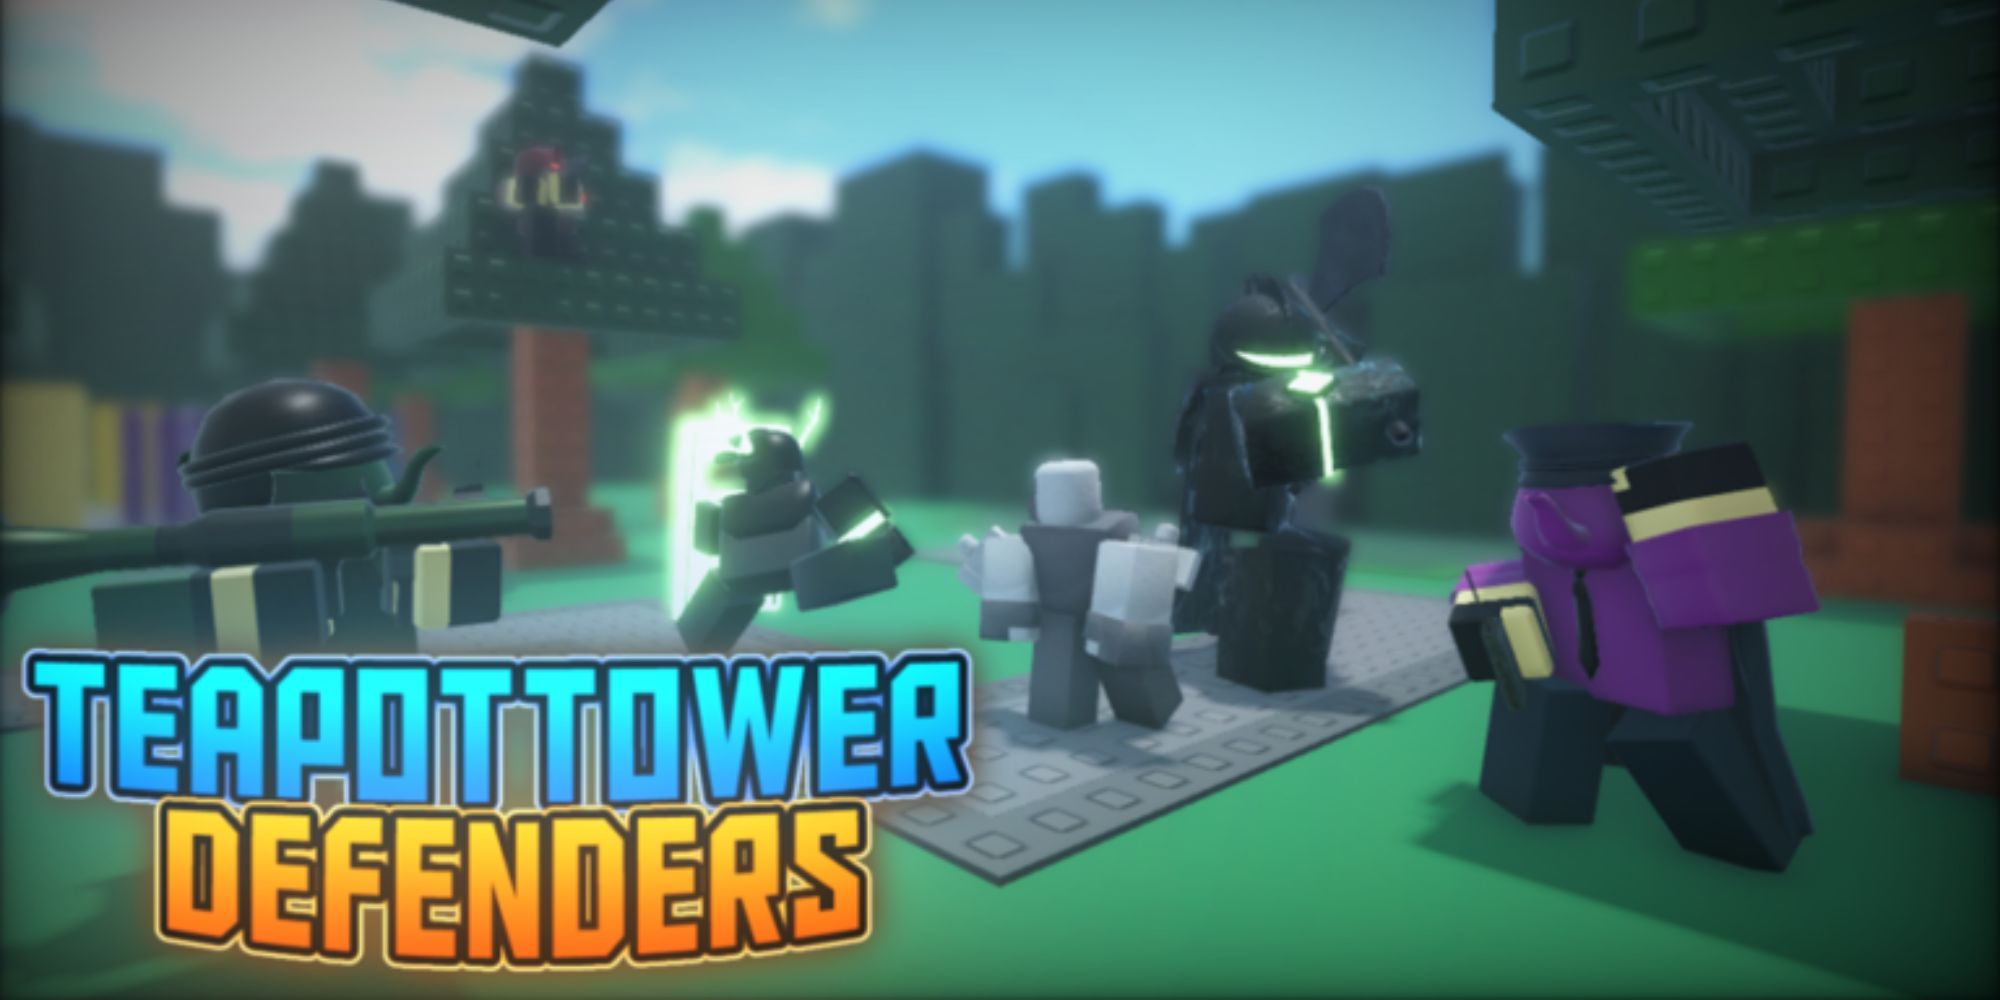 Roblox's Teapot Tower Defenders  main title screen